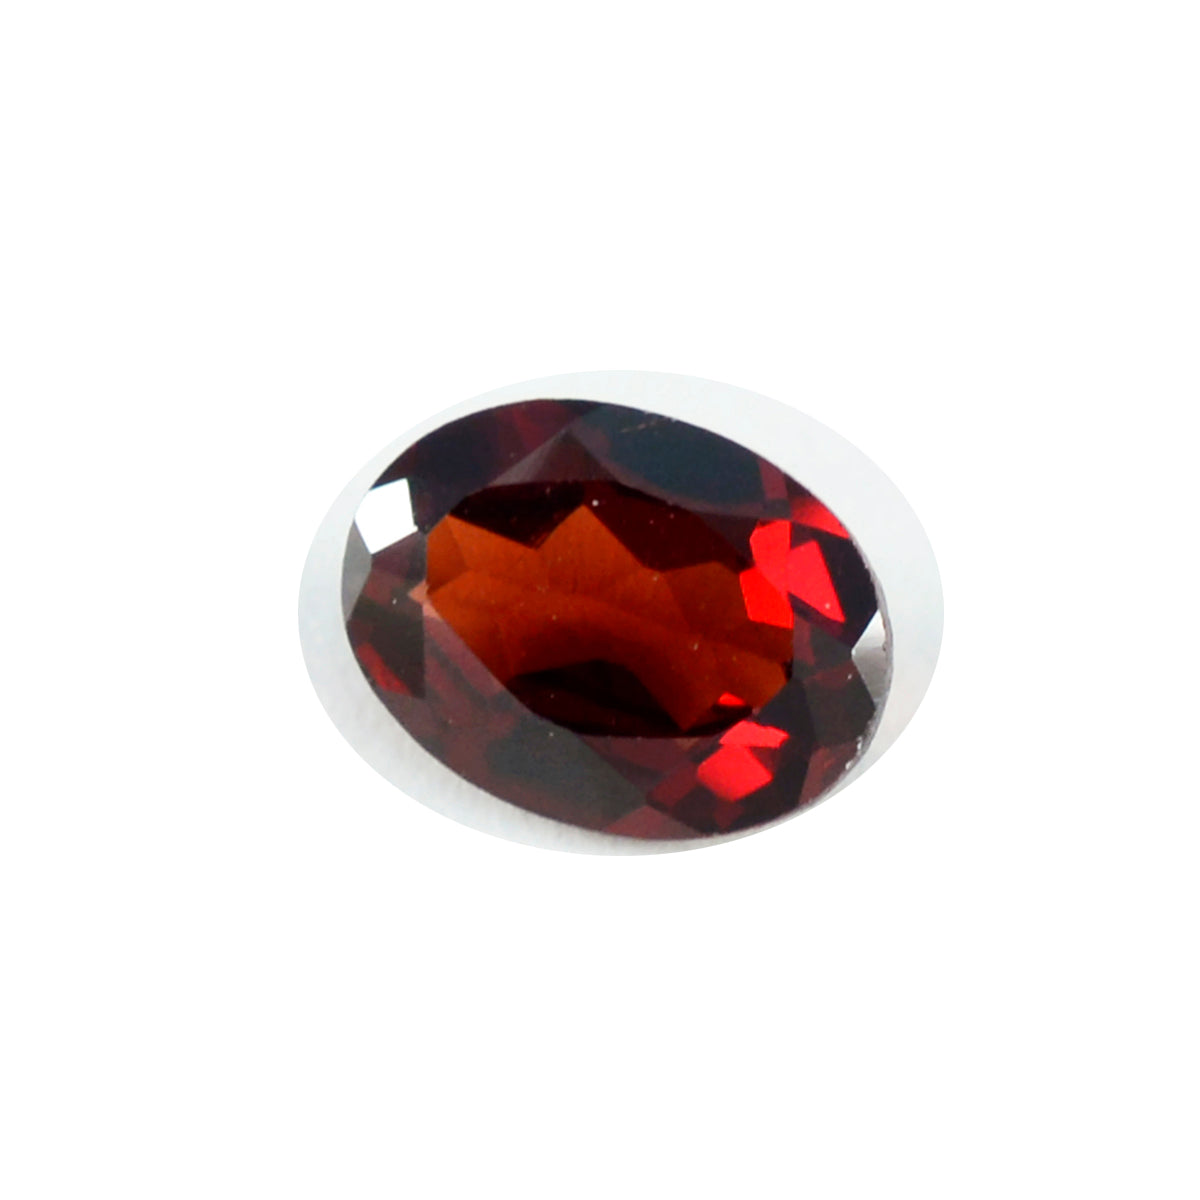 Riyogems 1PC Real Red Garnet Faceted 12x16 mm Oval Shape good-looking Quality Gem